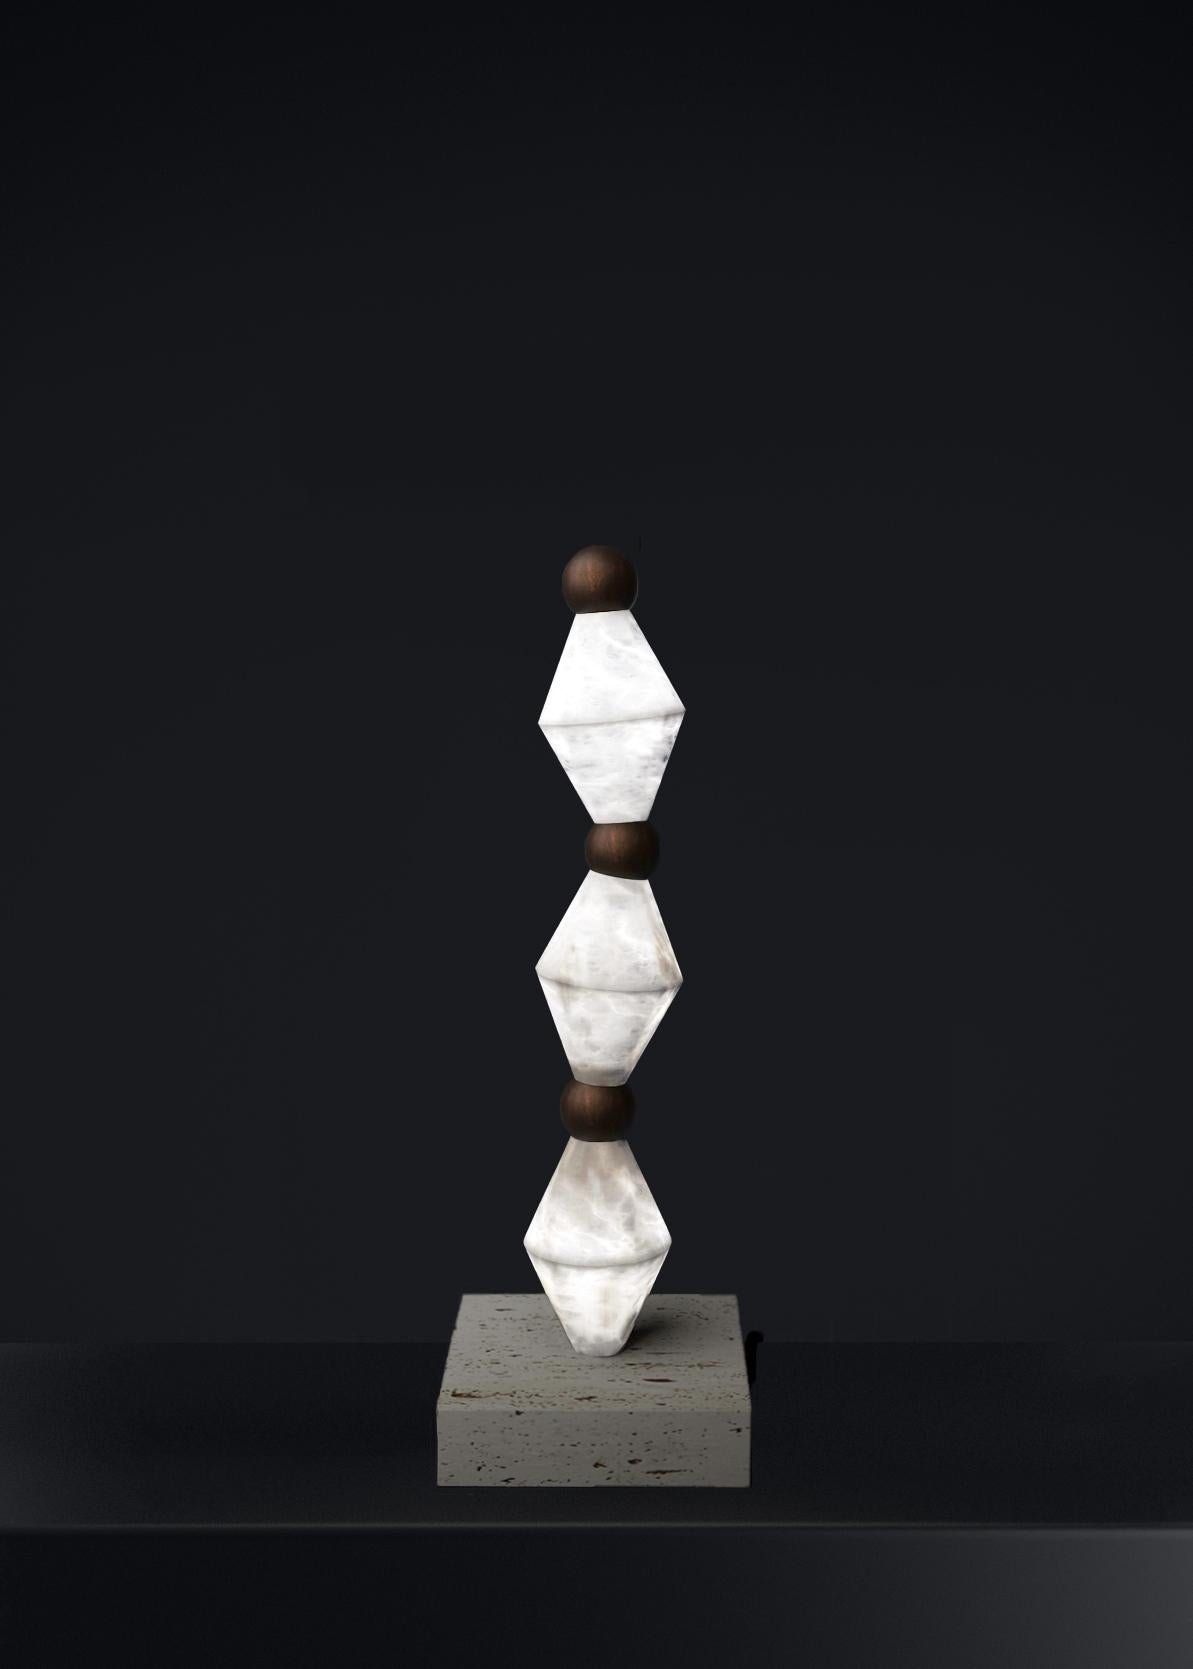 Chronos Ruggine Of Florence Table Lamp by Alabastro Italiano
Dimensions: D 15 x W 15 x H 71,5 cm.
Materials: White alabaster, marble and metal.

Available in different finishes: Shiny Silver, Bronze, Brushed Brass, Ruggine of Florence, Brushed